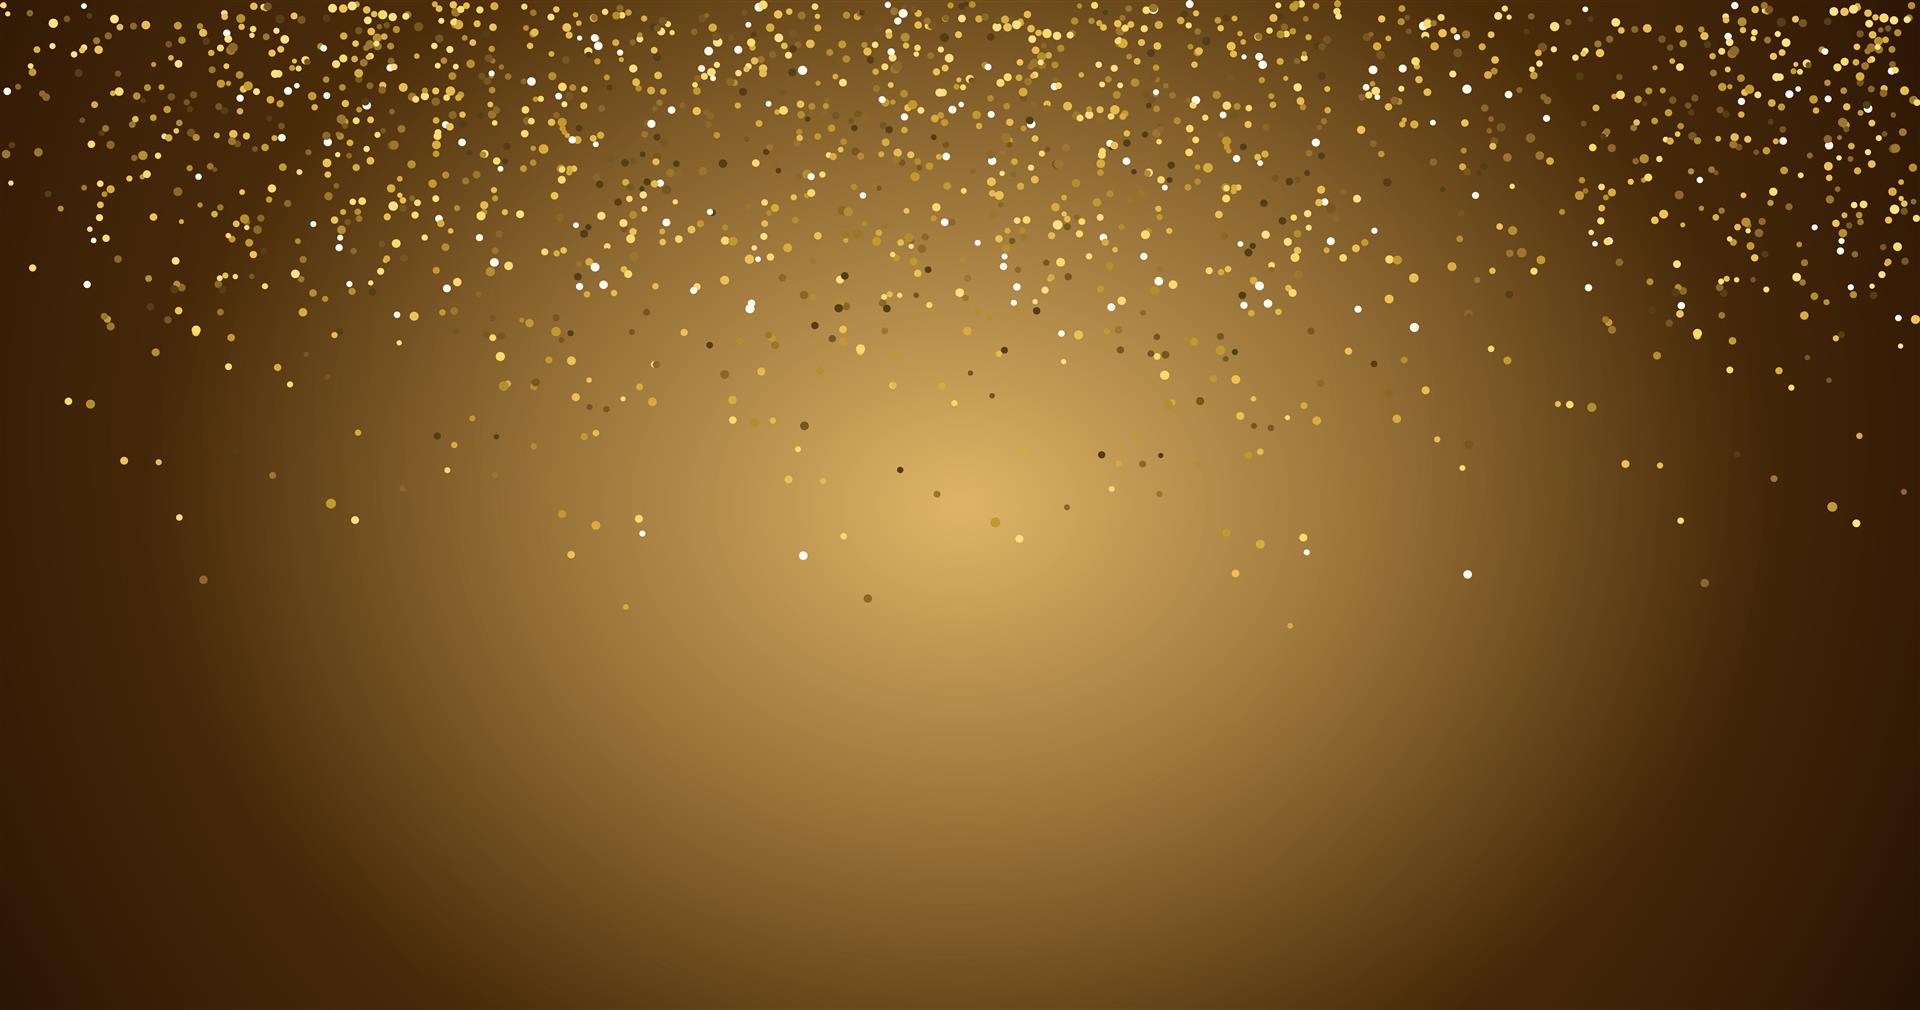 waterfalls golden glitter sparkle-bubbles champagne particles stars